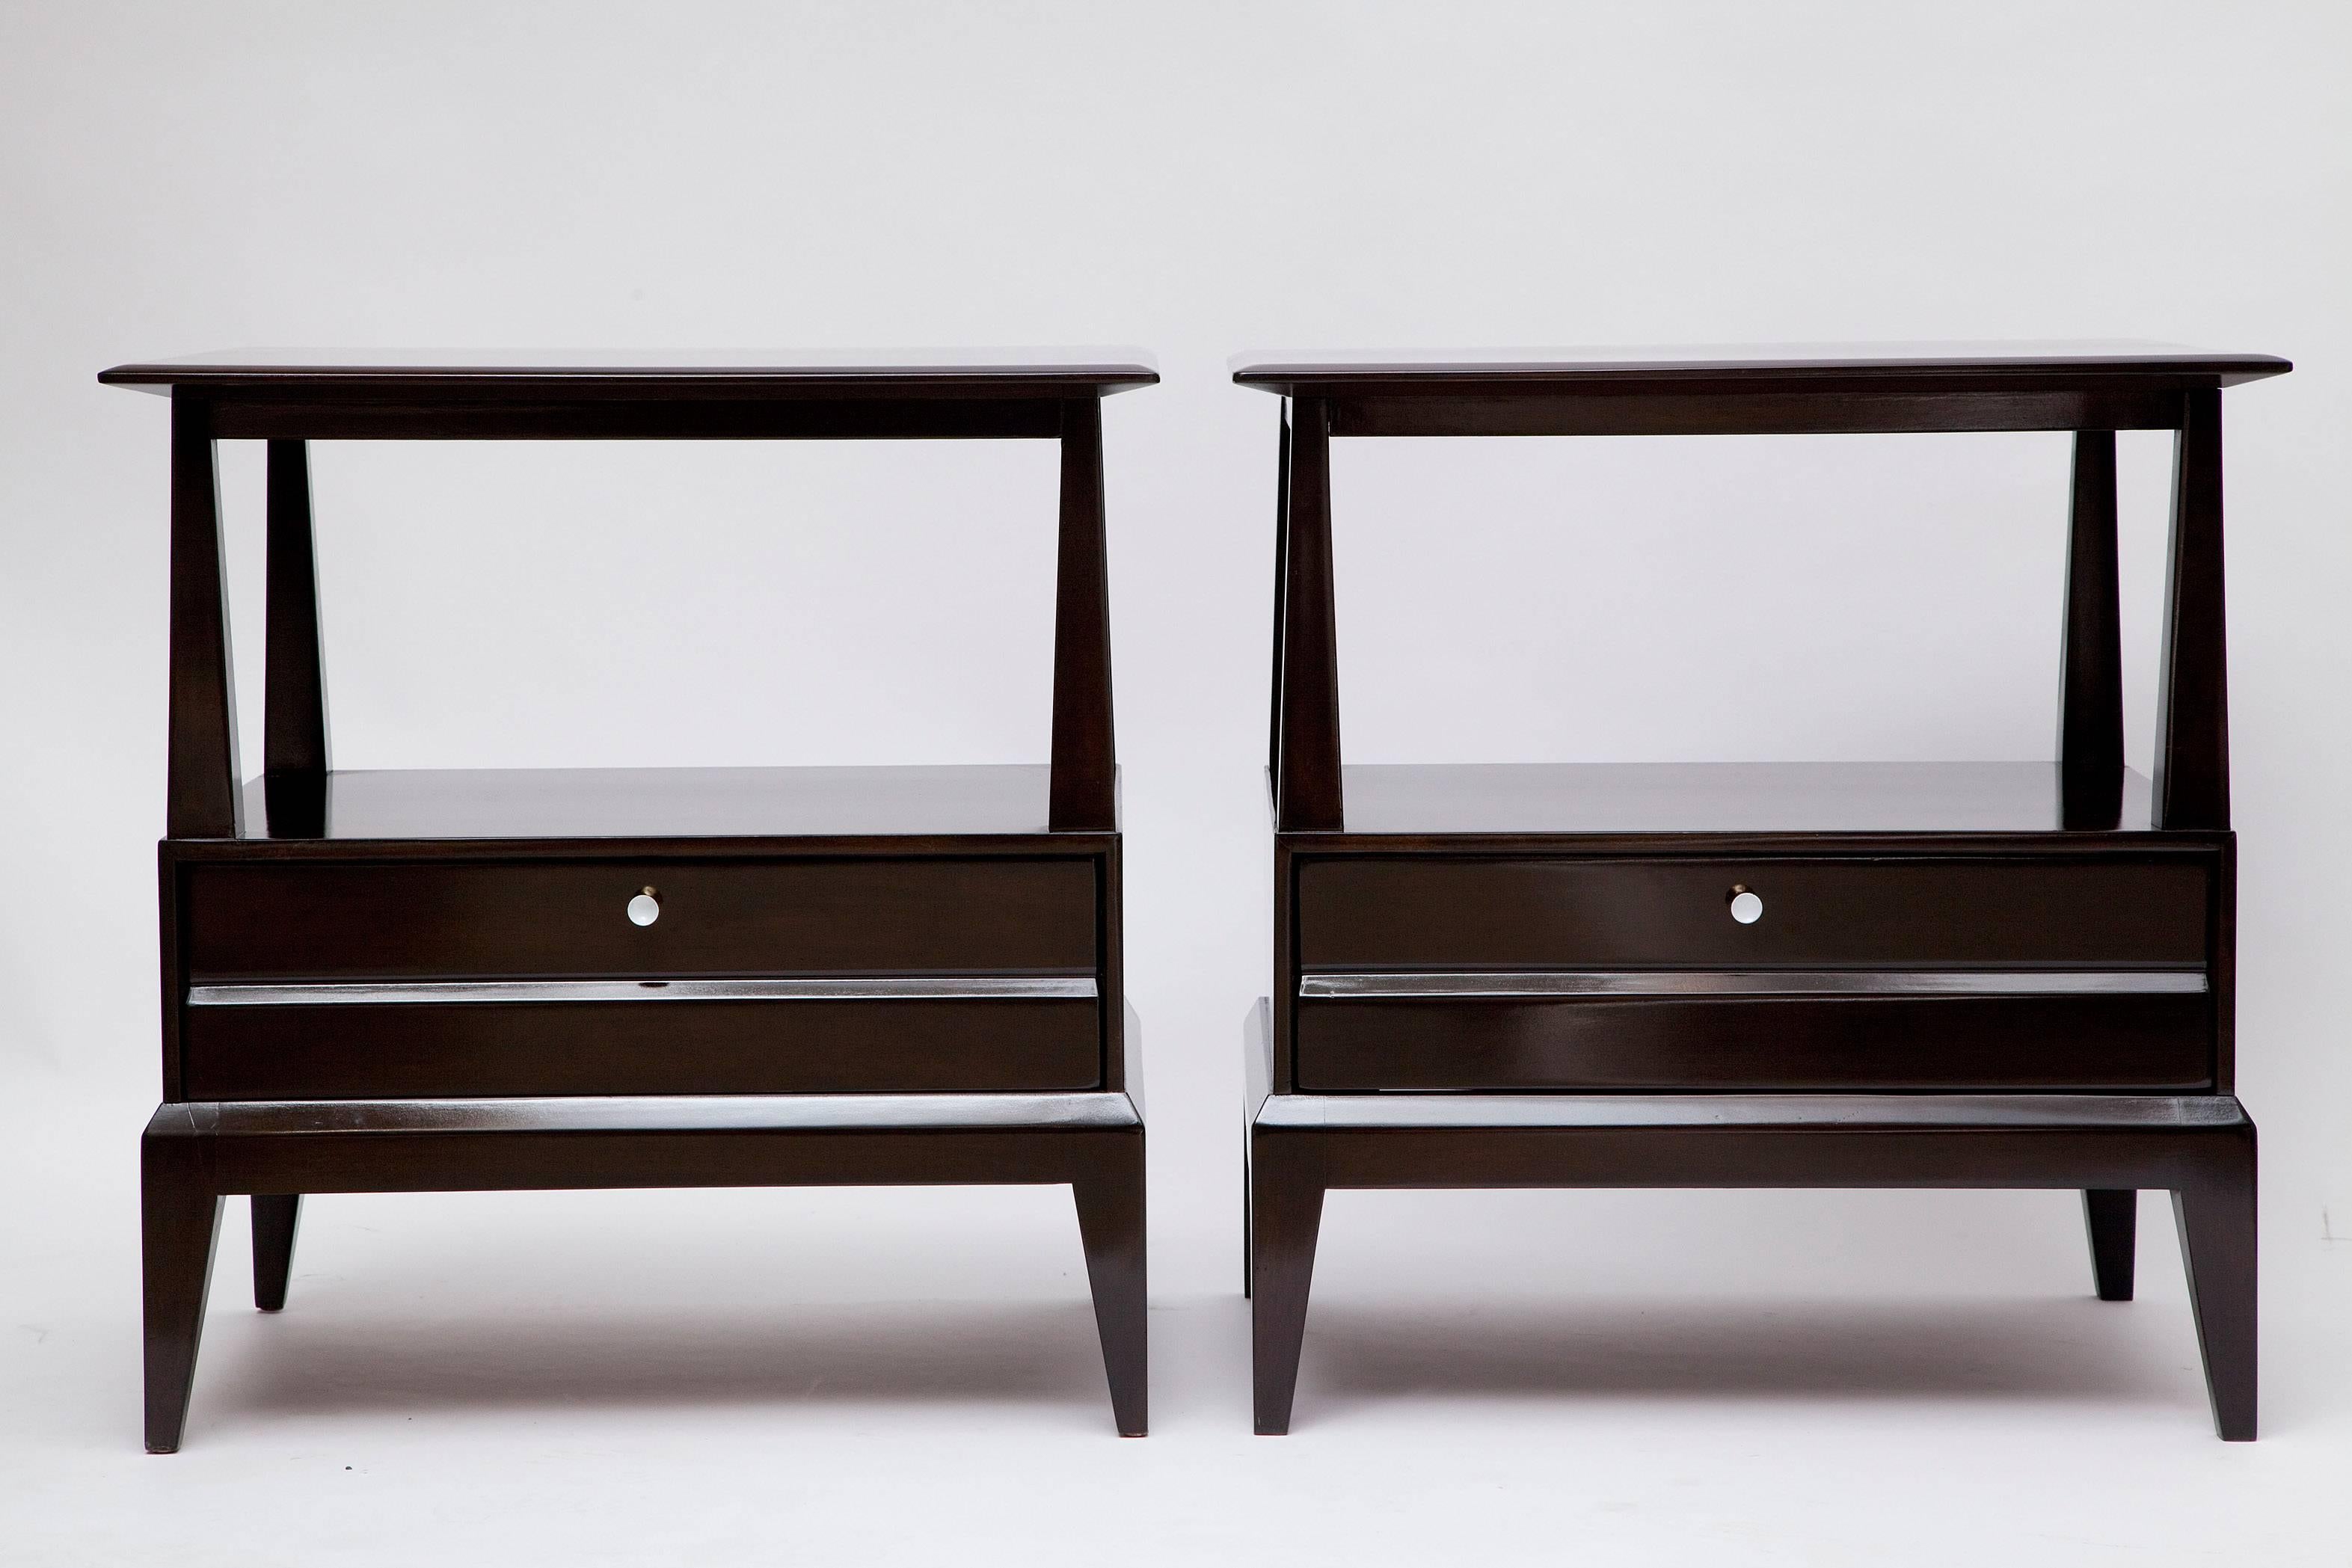 We've had this pair of 1960s Heywood-Wakefield walnut nightstands ebonized to enhance their (surprisingly) chic shapes. Original solid brass drawer pulls with white enamel centers.